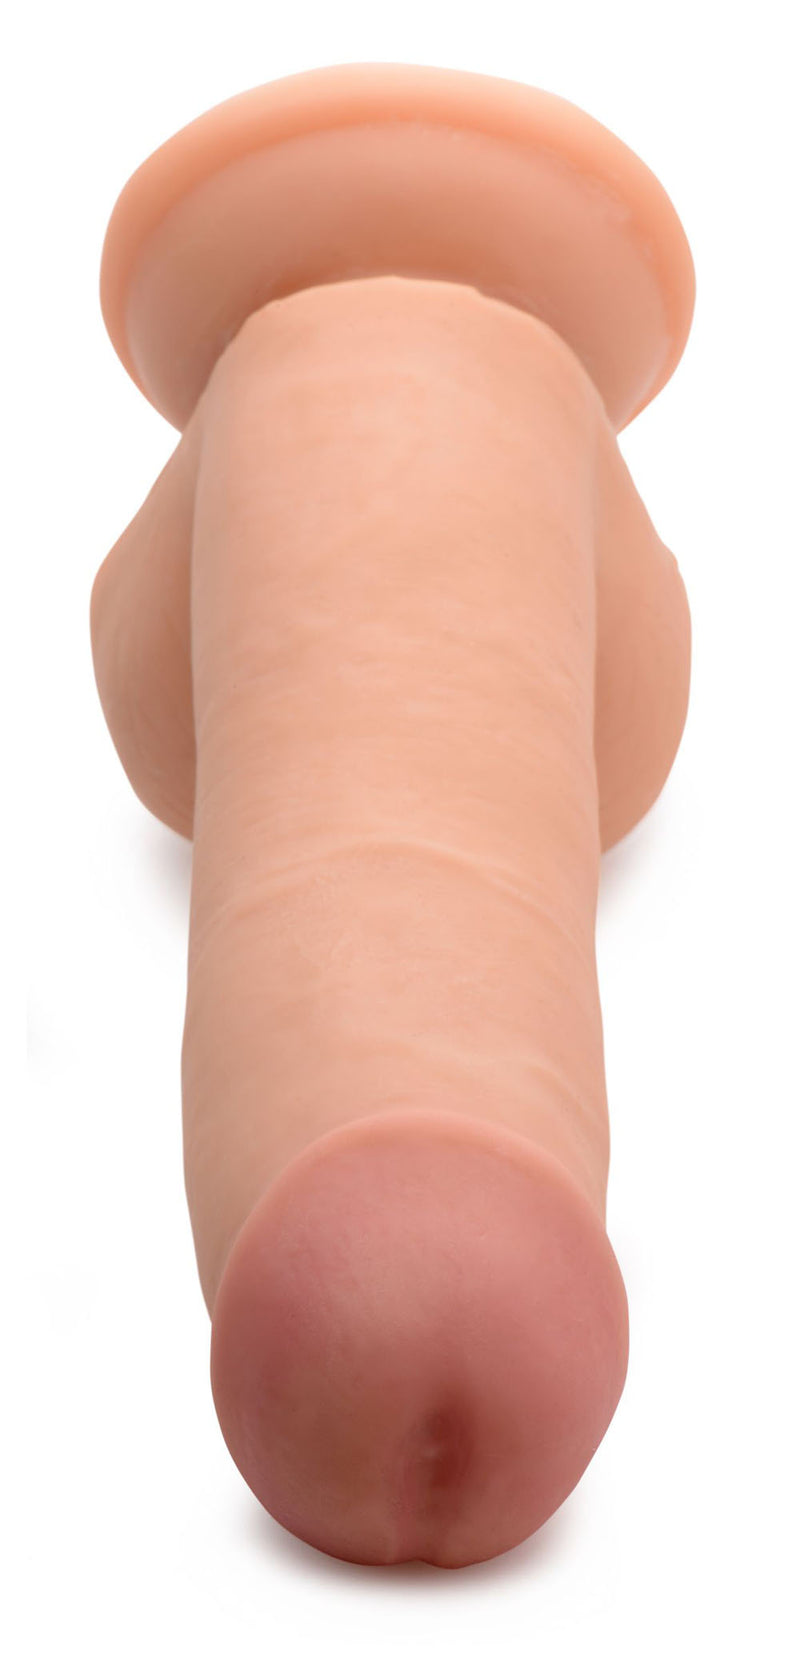 Realistic 7-Inch Suction Cup Dildo for Hands-Free Pleasure and Strap-On Play - Made in USA with Phthalate-Free Ameriskin